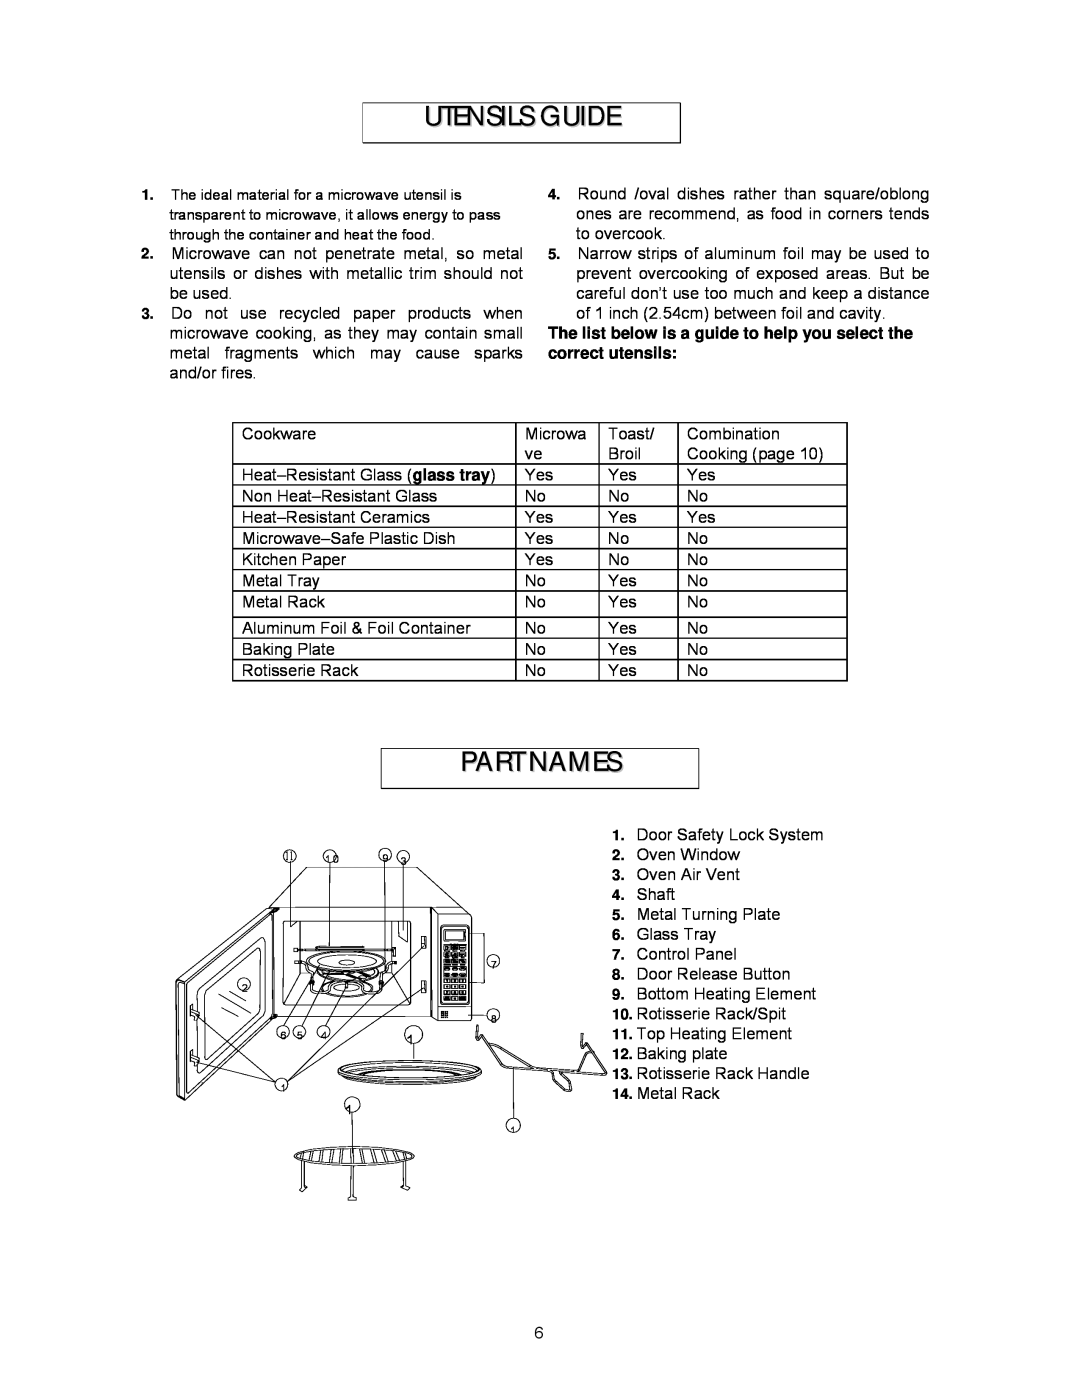 Magnasonic MMW6103-3 Utensils Guide, Part Names, The list below is a guide to help you select the correct utensils, Shaft 